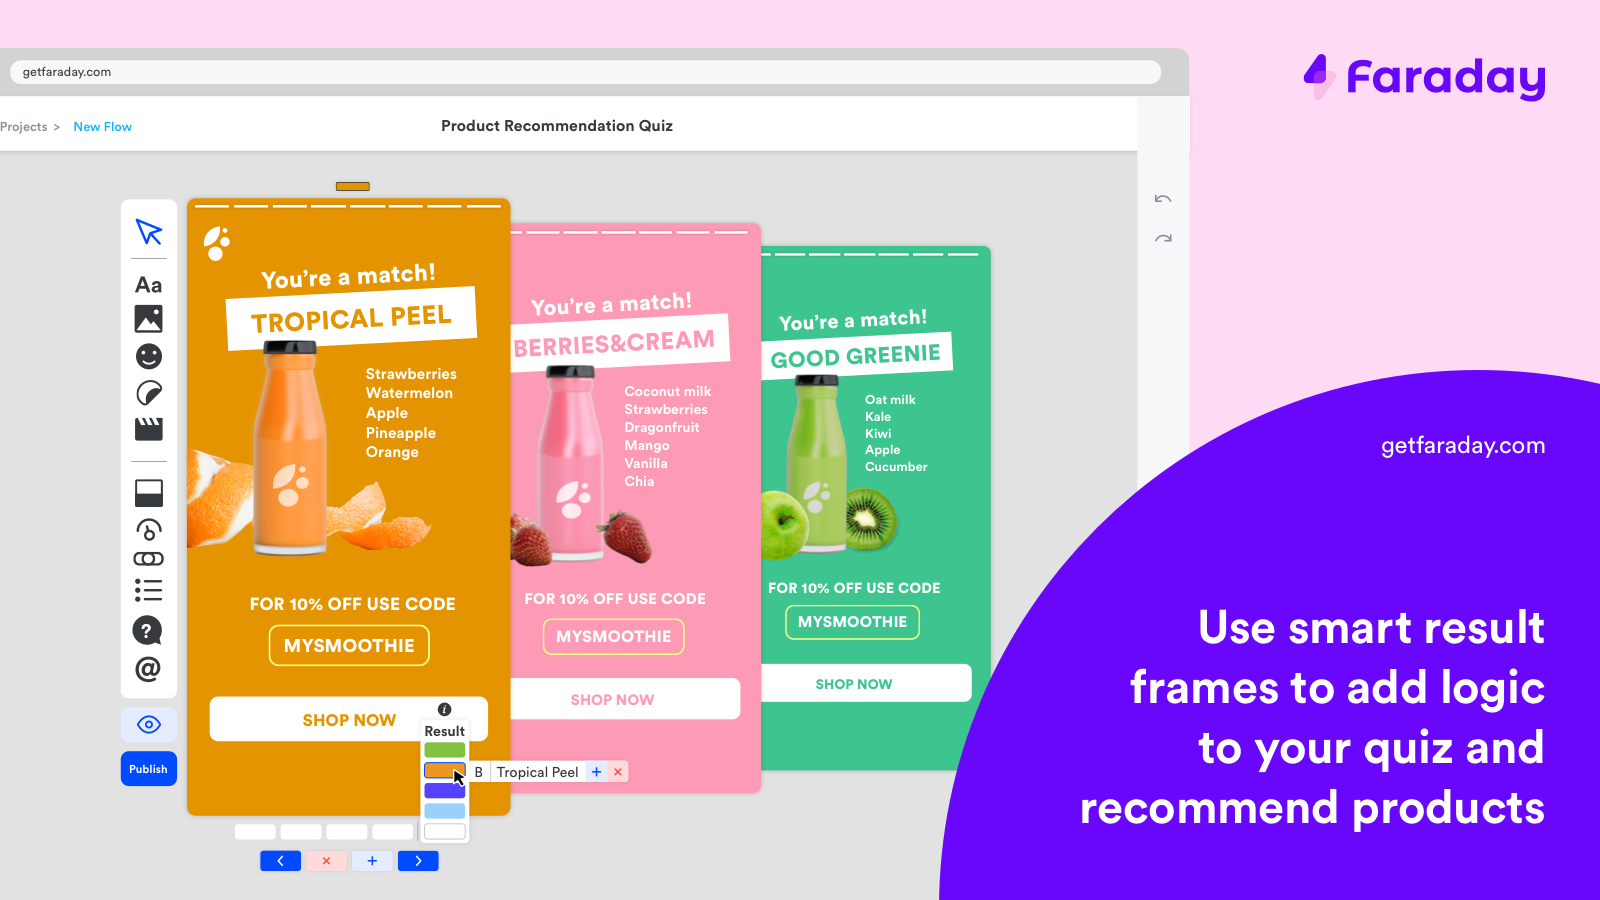 Use smart result frames to recommend products